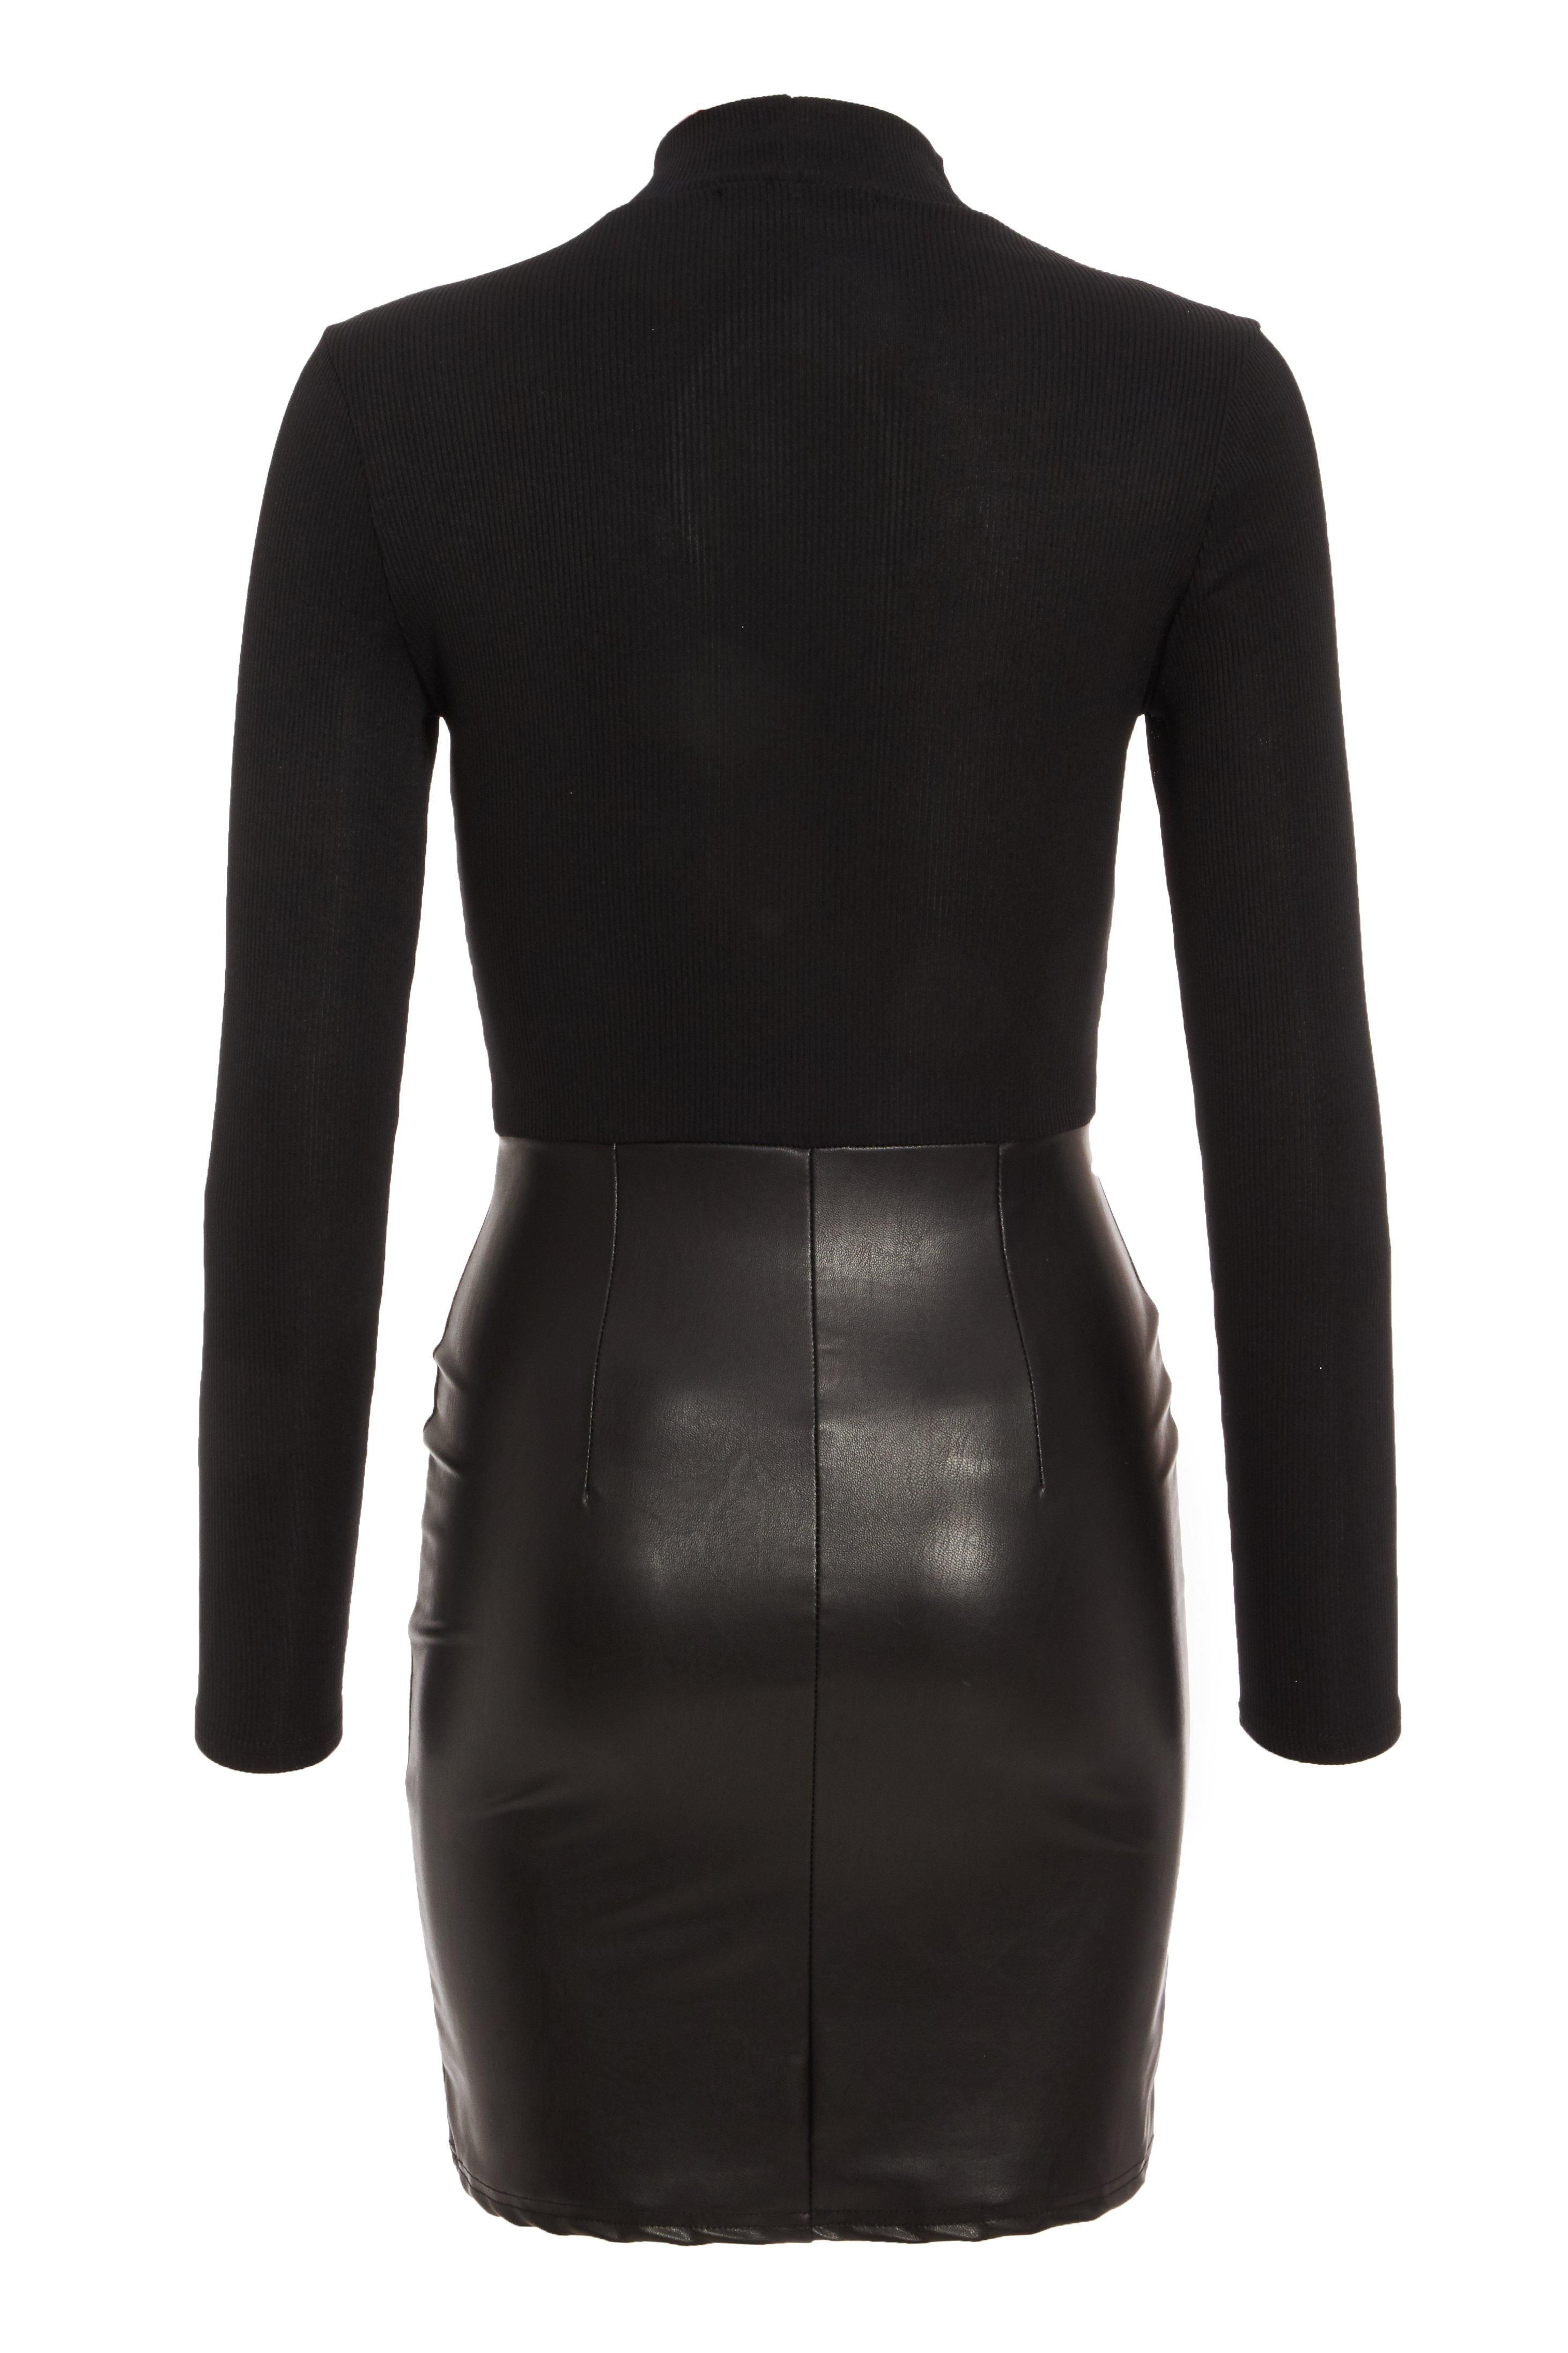 - Ribbed finish  - Faux leather skirt  - Bodycon style  - Long sleeve  - High neck   - Length: 88cm approx  - Model Height: 5' 4